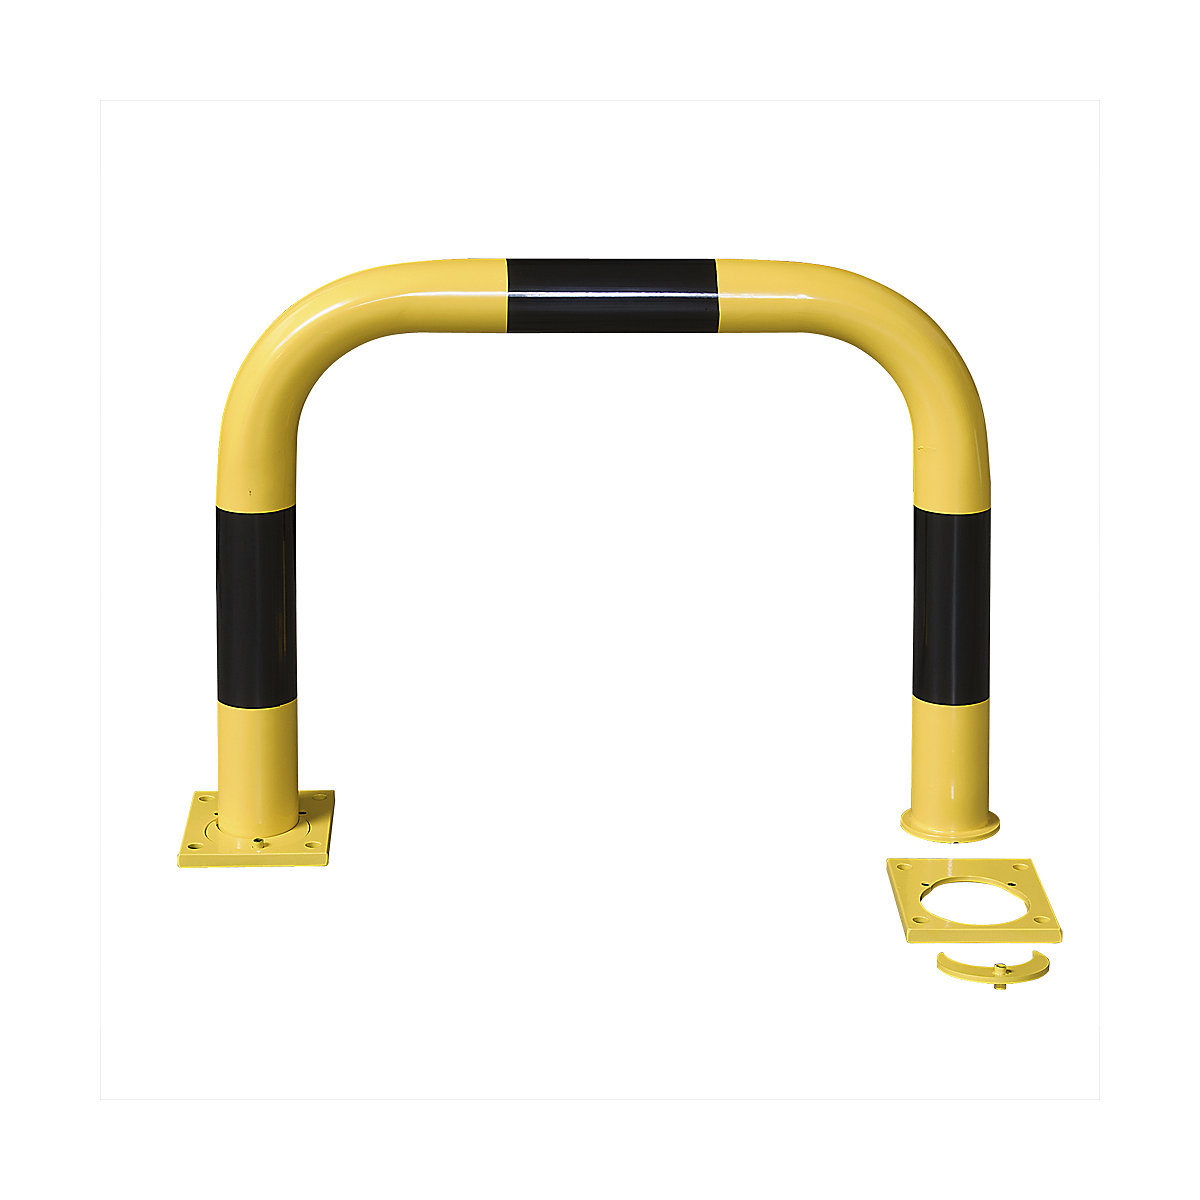 Crash protection bar, removable, black / yellow, HxW 600 x 750 mm-6